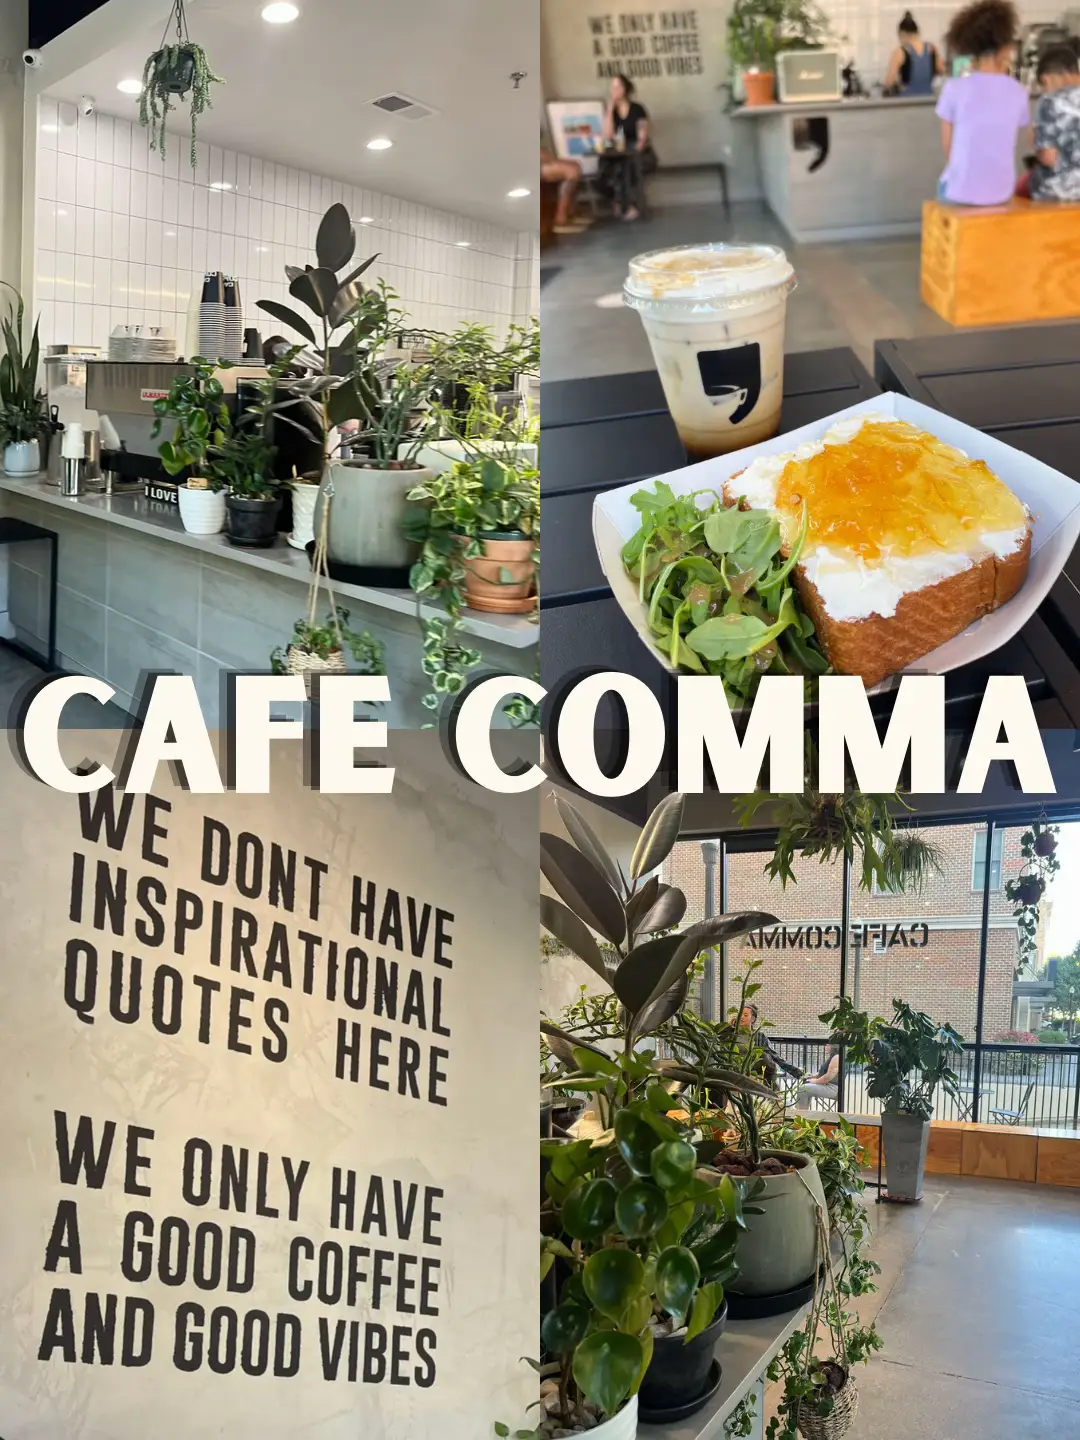  A collage of images and text that says "Cafe comma".